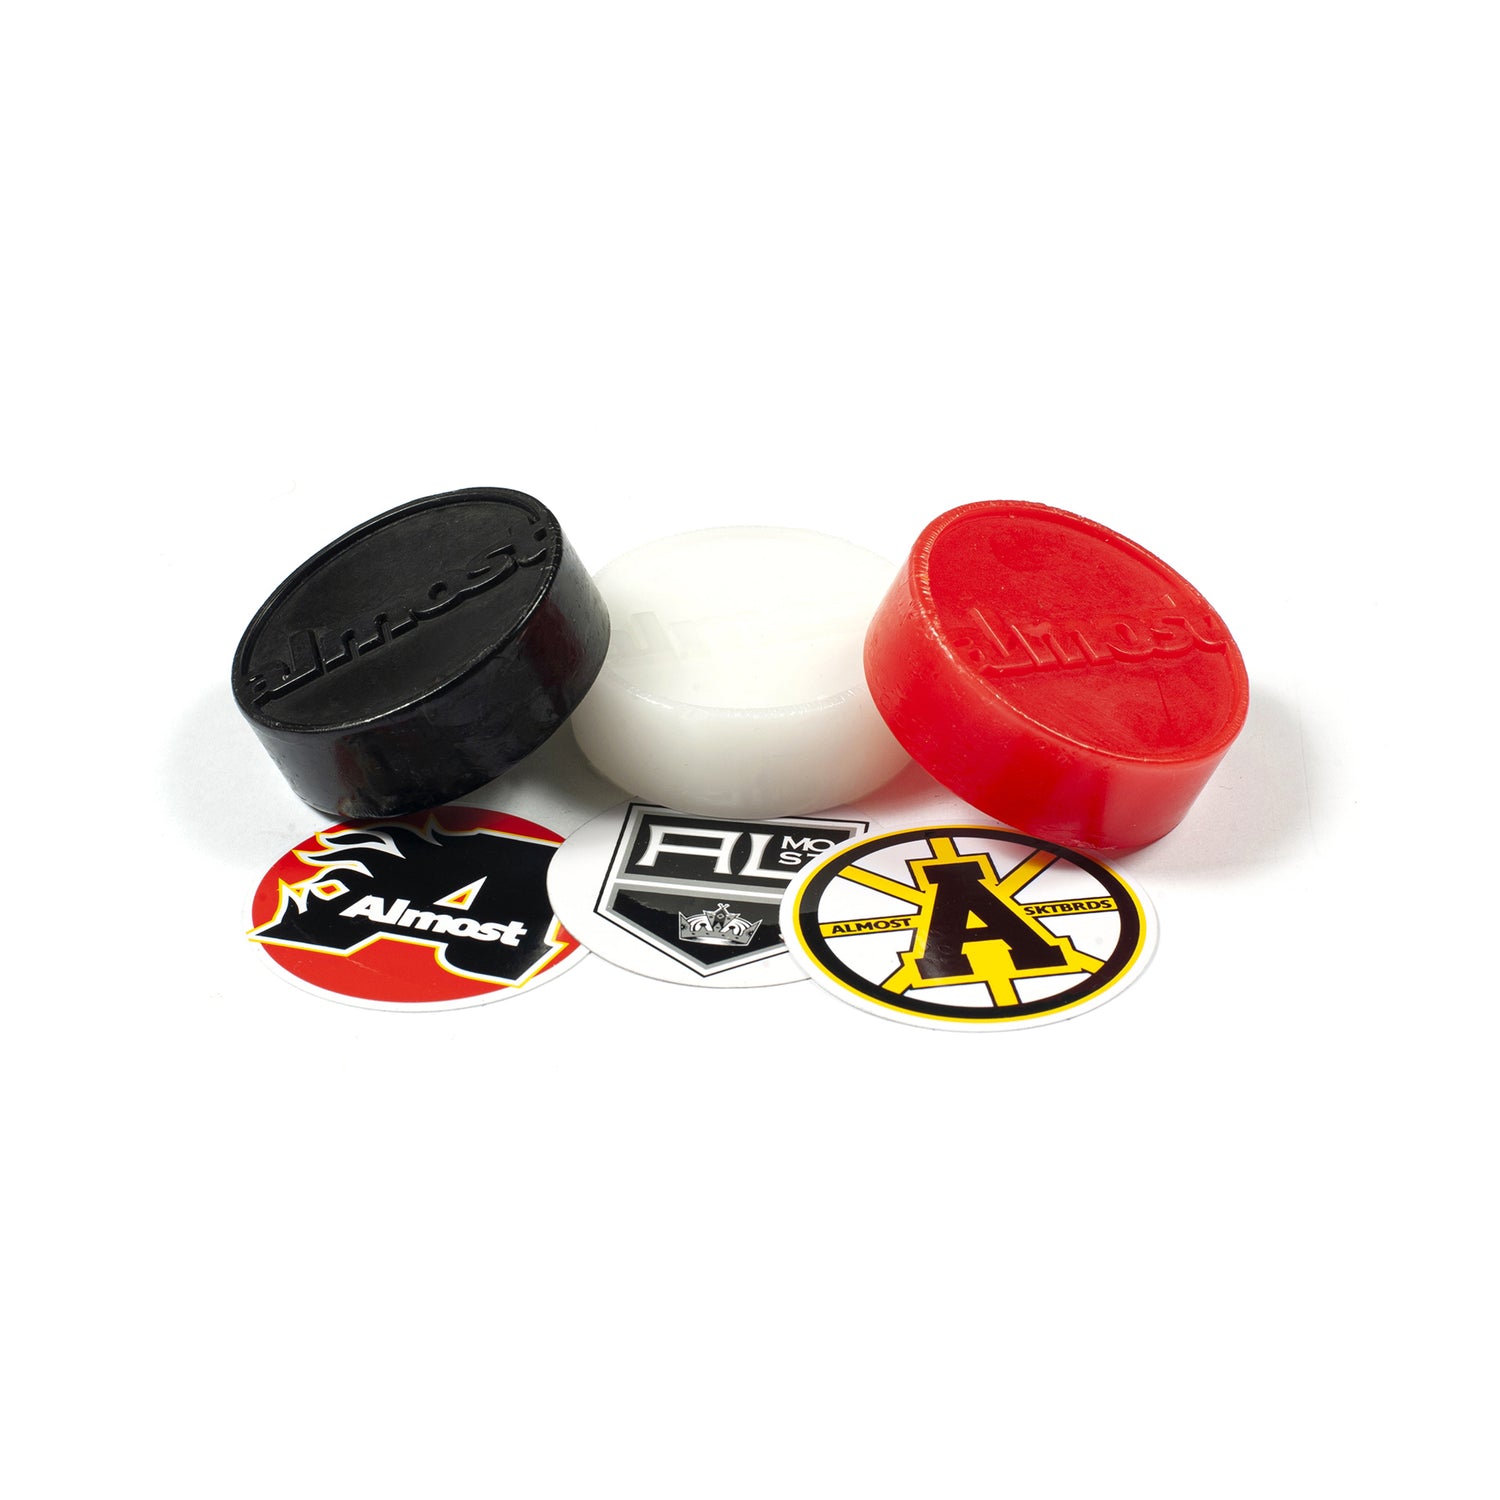 Almost Wax - Puck Red White/Black